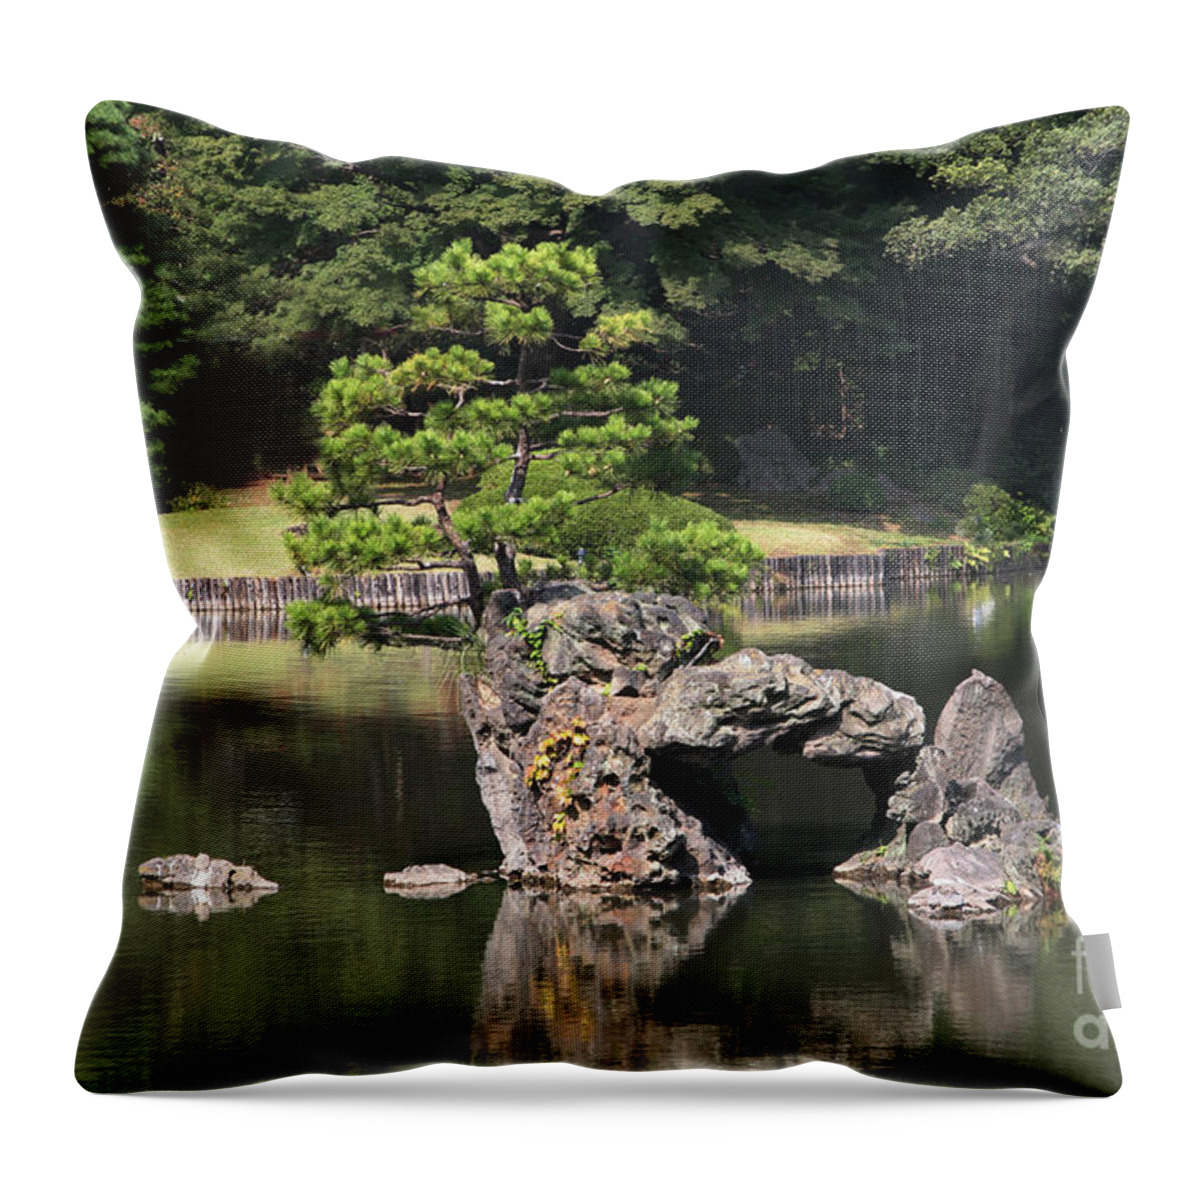 Japan Throw Pillow featuring the digital art Japanese Japanese Garden by Jack Ader